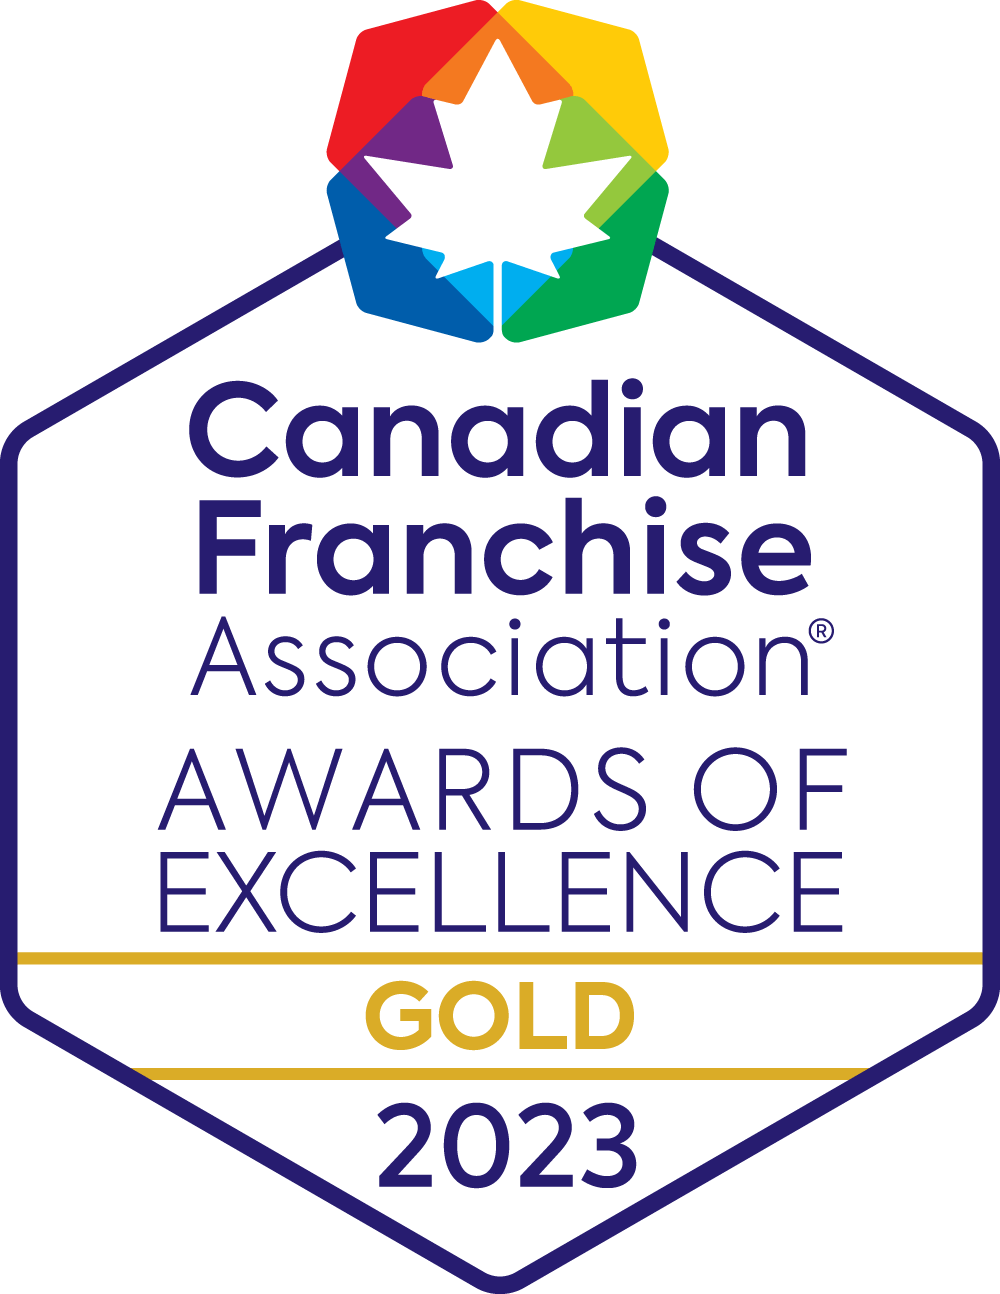 CFA Canadian franchise association awards of excellence arwarded to Driverseat Inc